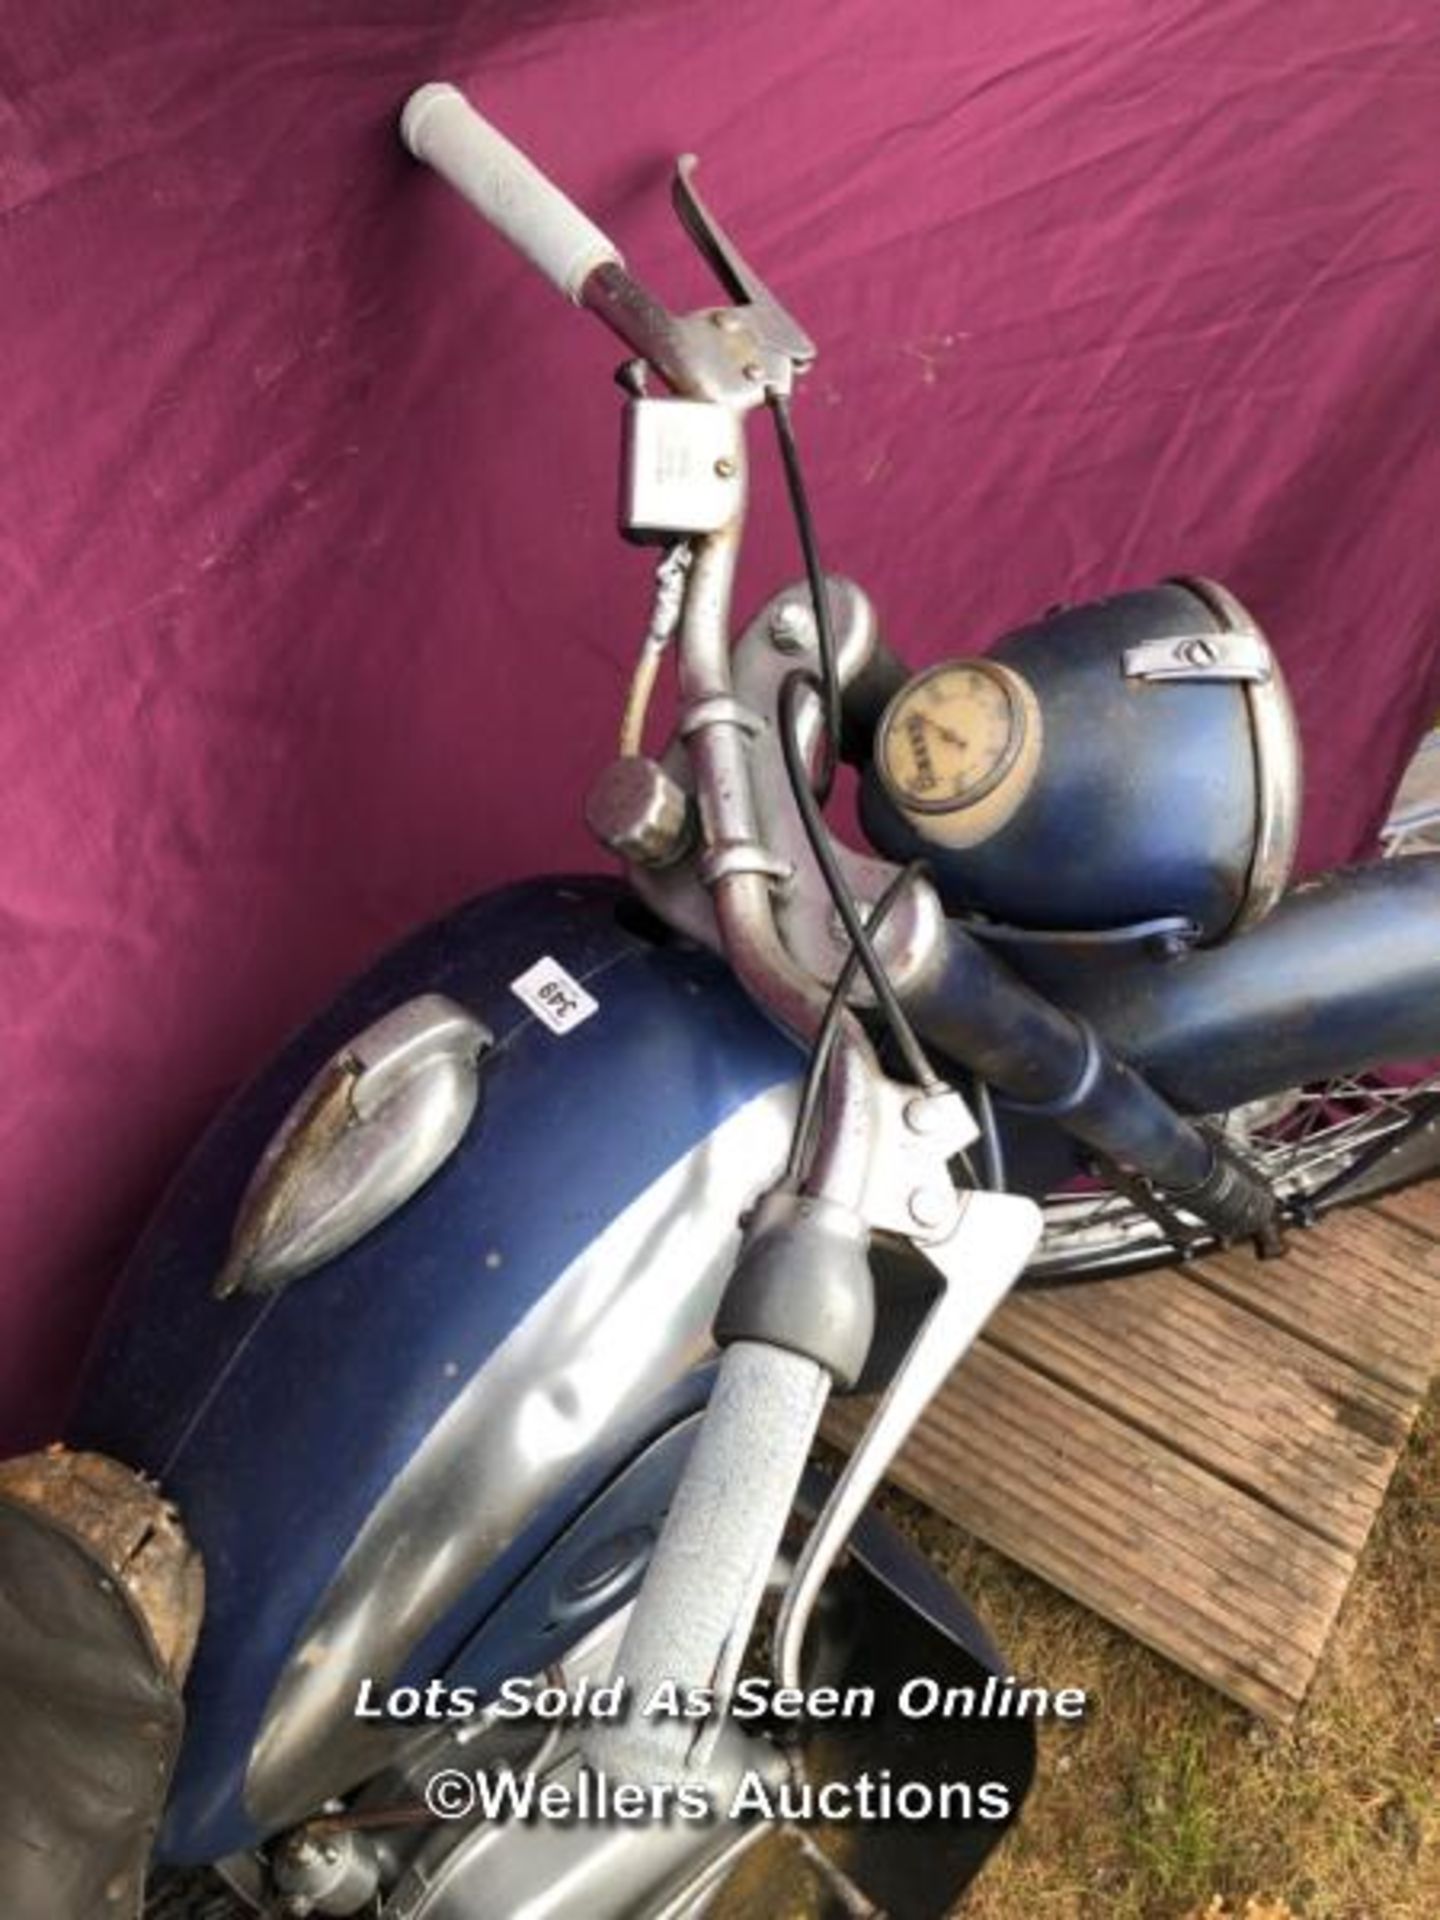 PEUGEOT 125 1955 MOTORCYCLE, FOR RESTORATION - This lot is located away from the auction site, to - Image 5 of 10